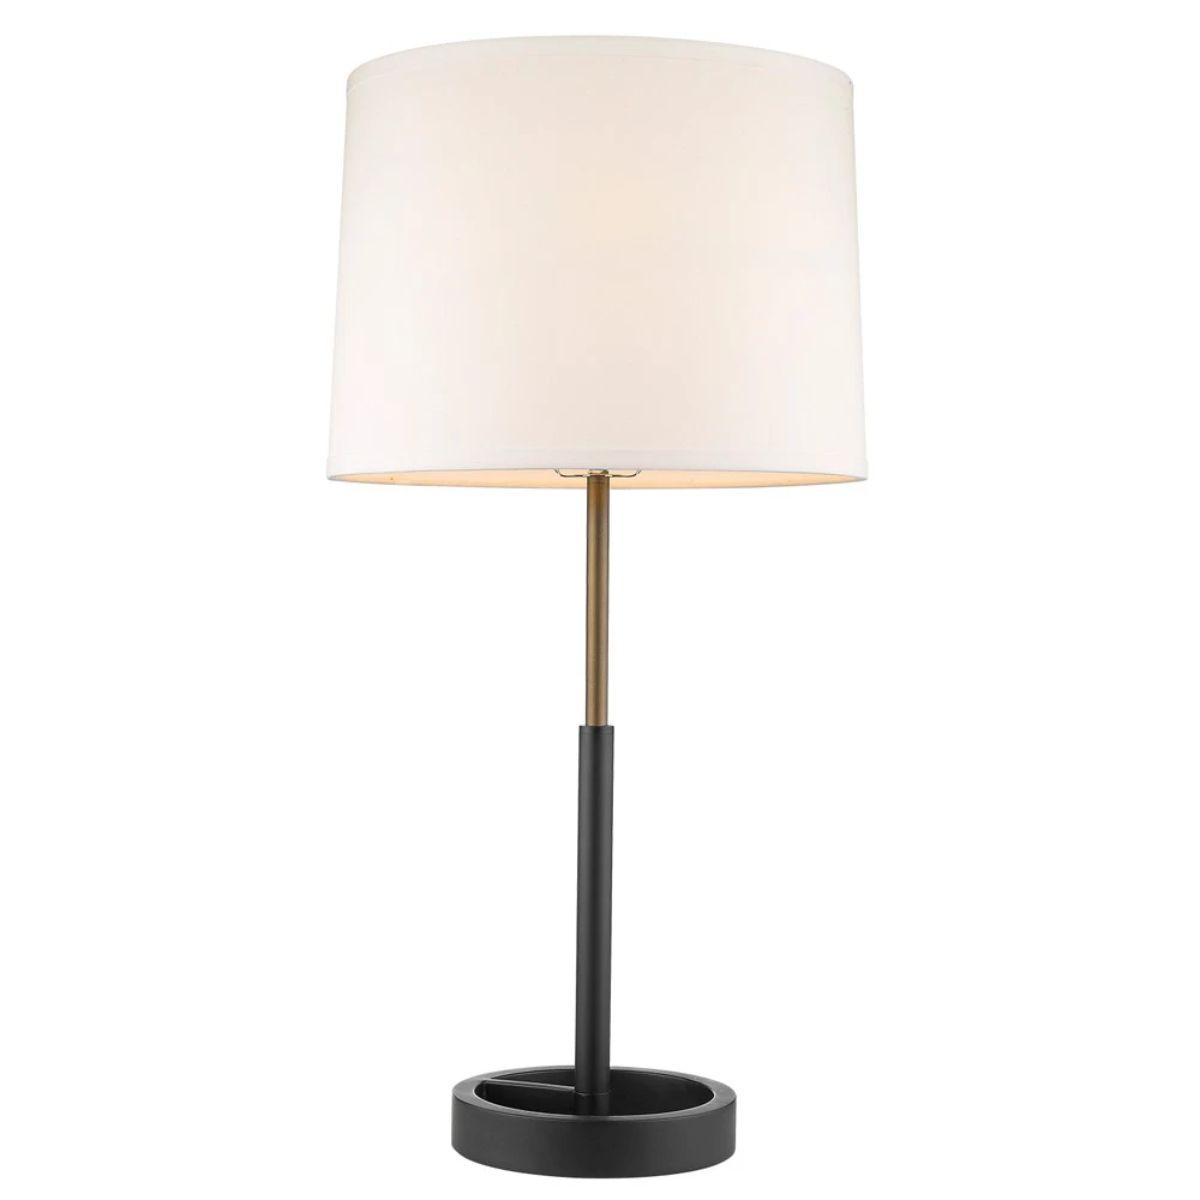 Rotunda 1 Light Table Lamp Matte Black and Hand Painted Antique Gold Finish